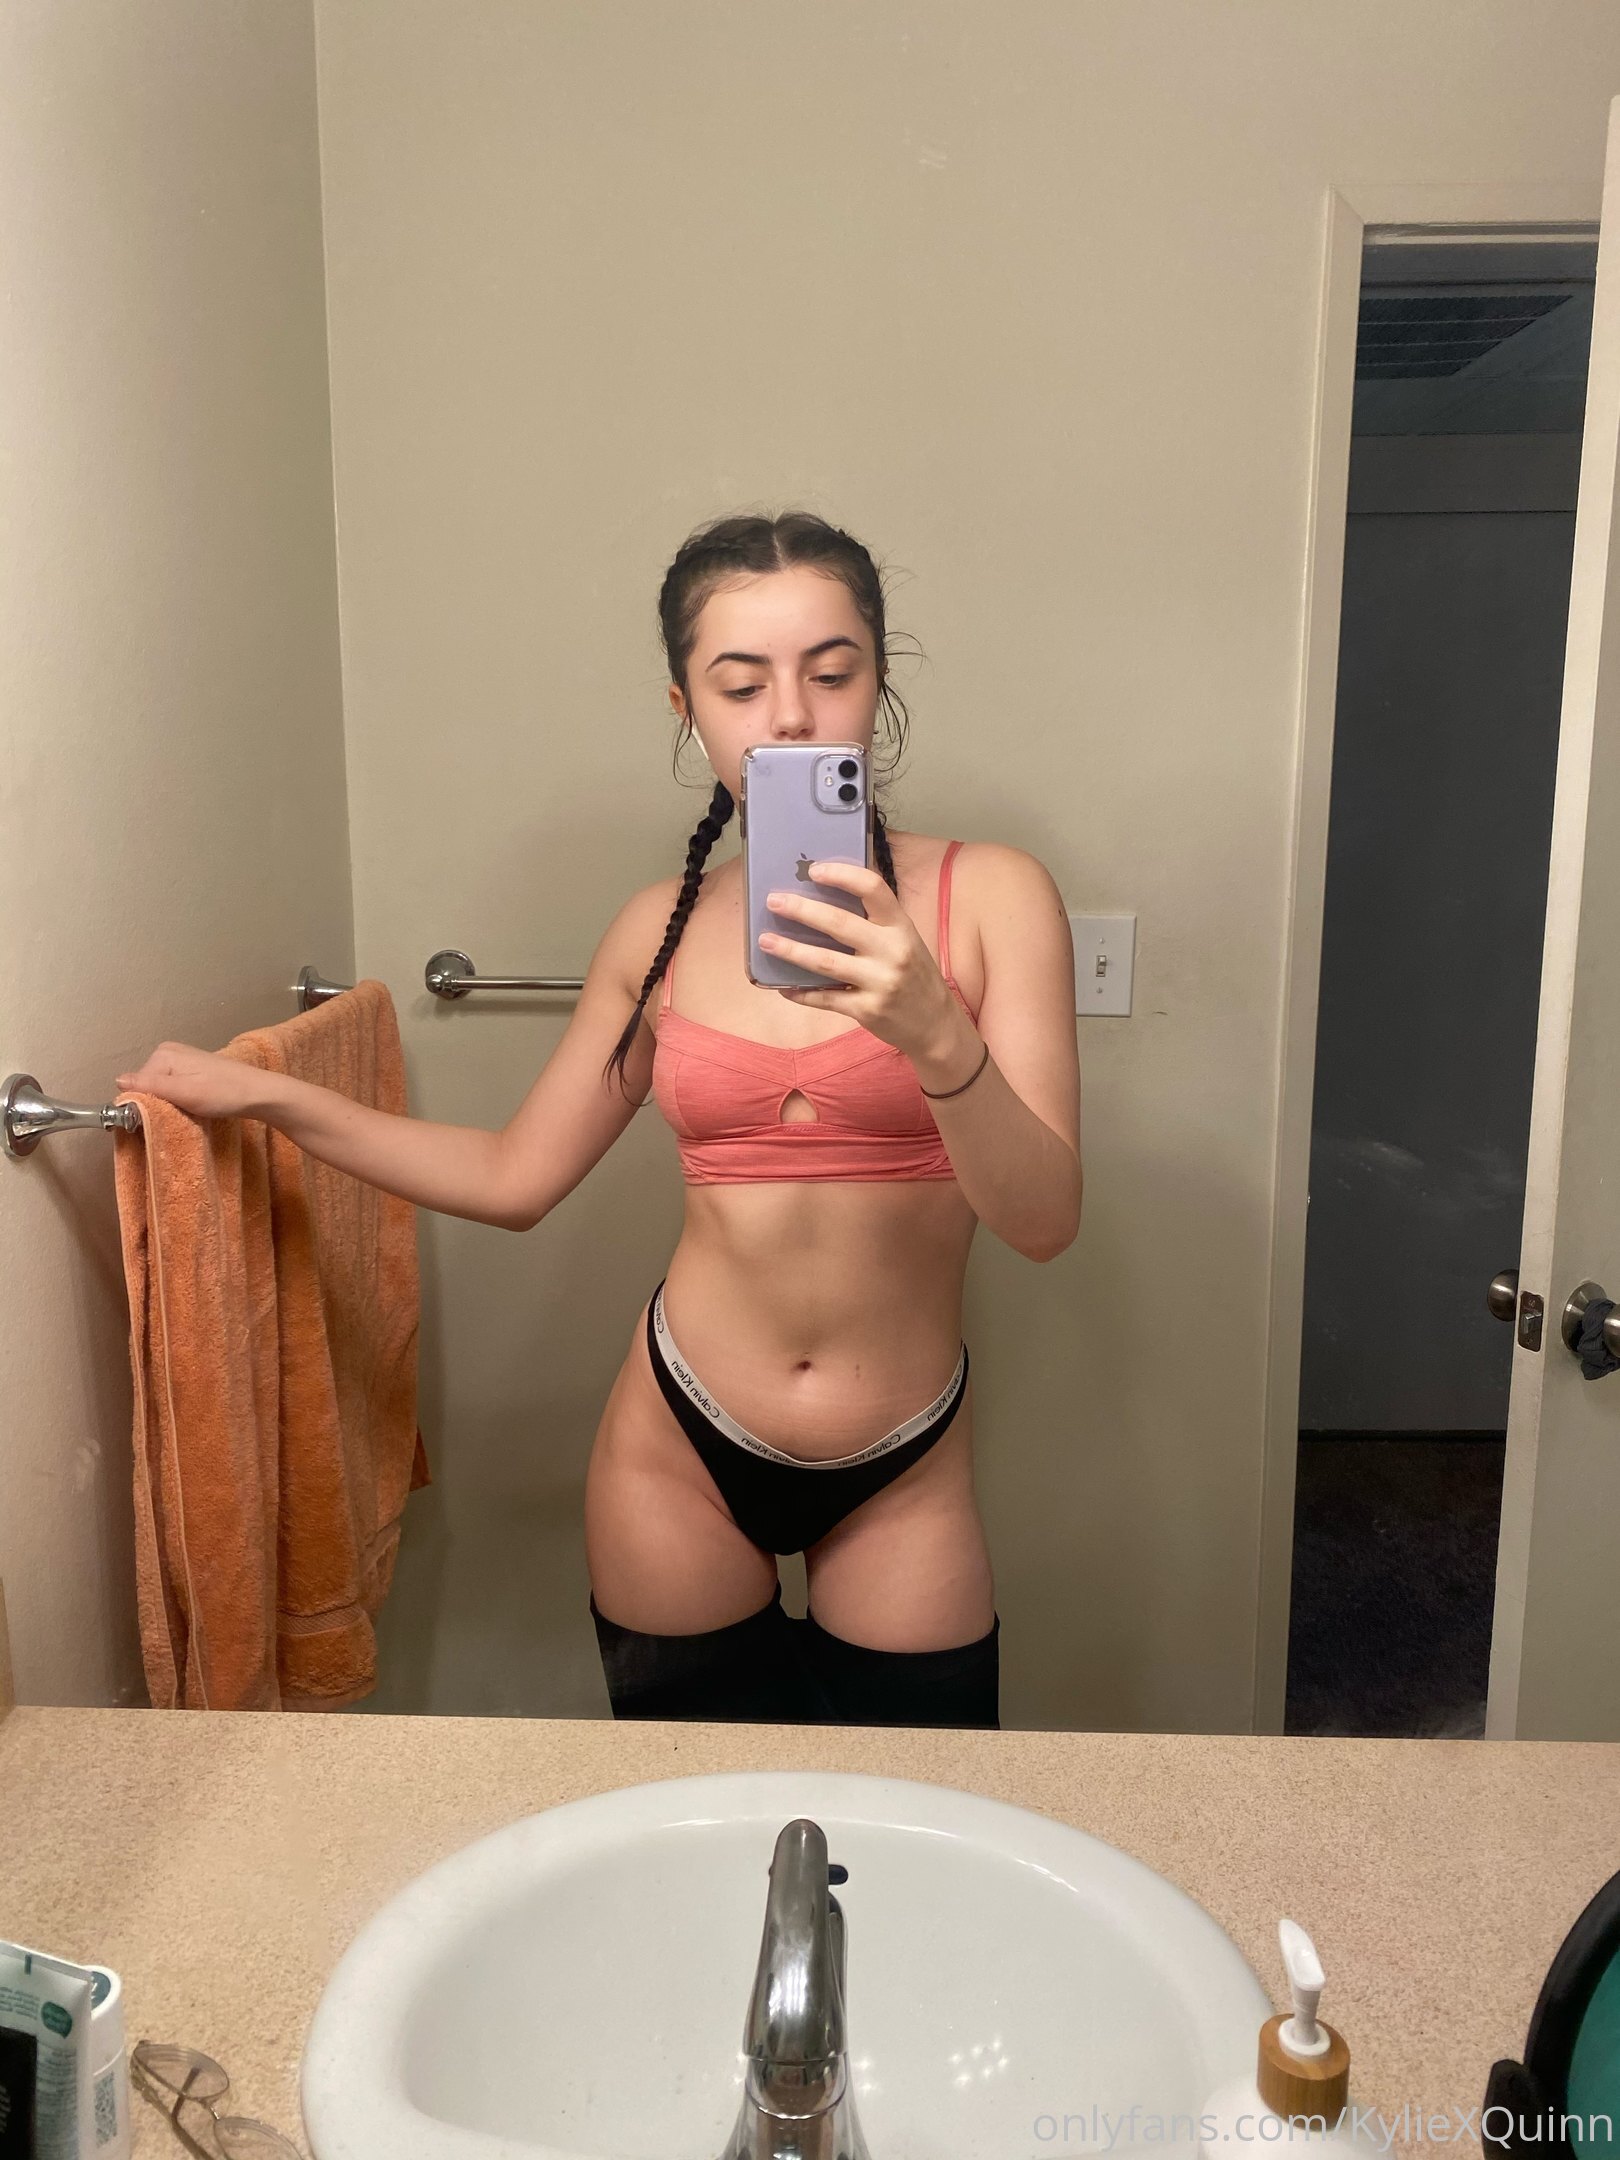 Kylie Xy, Kyliexquinn, Onlyfans 0056